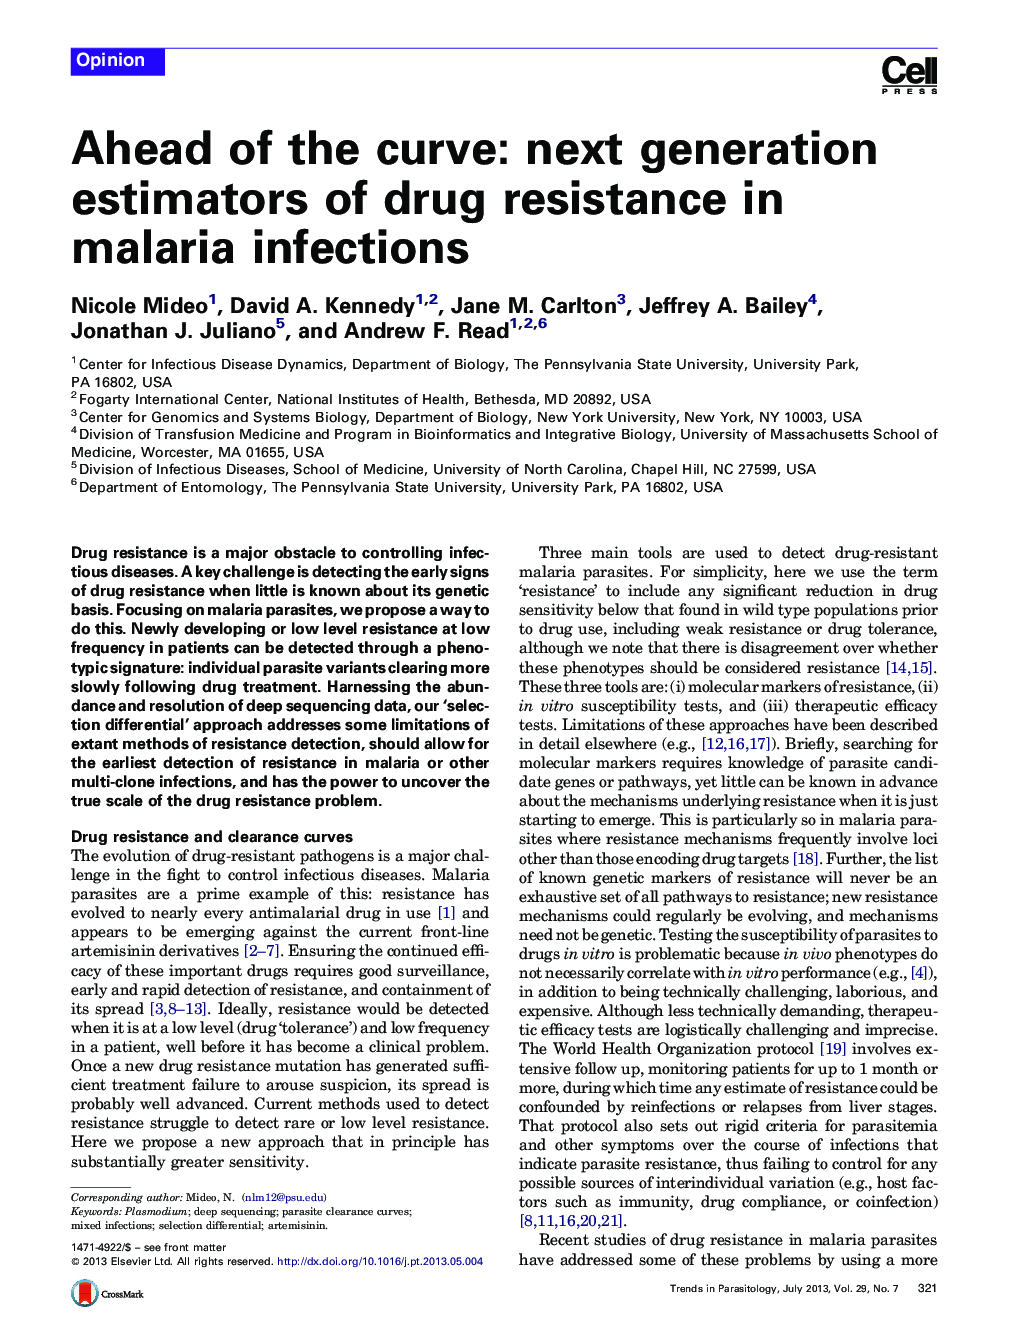 Ahead of the curve: next generation estimators of drug resistance in malaria infections